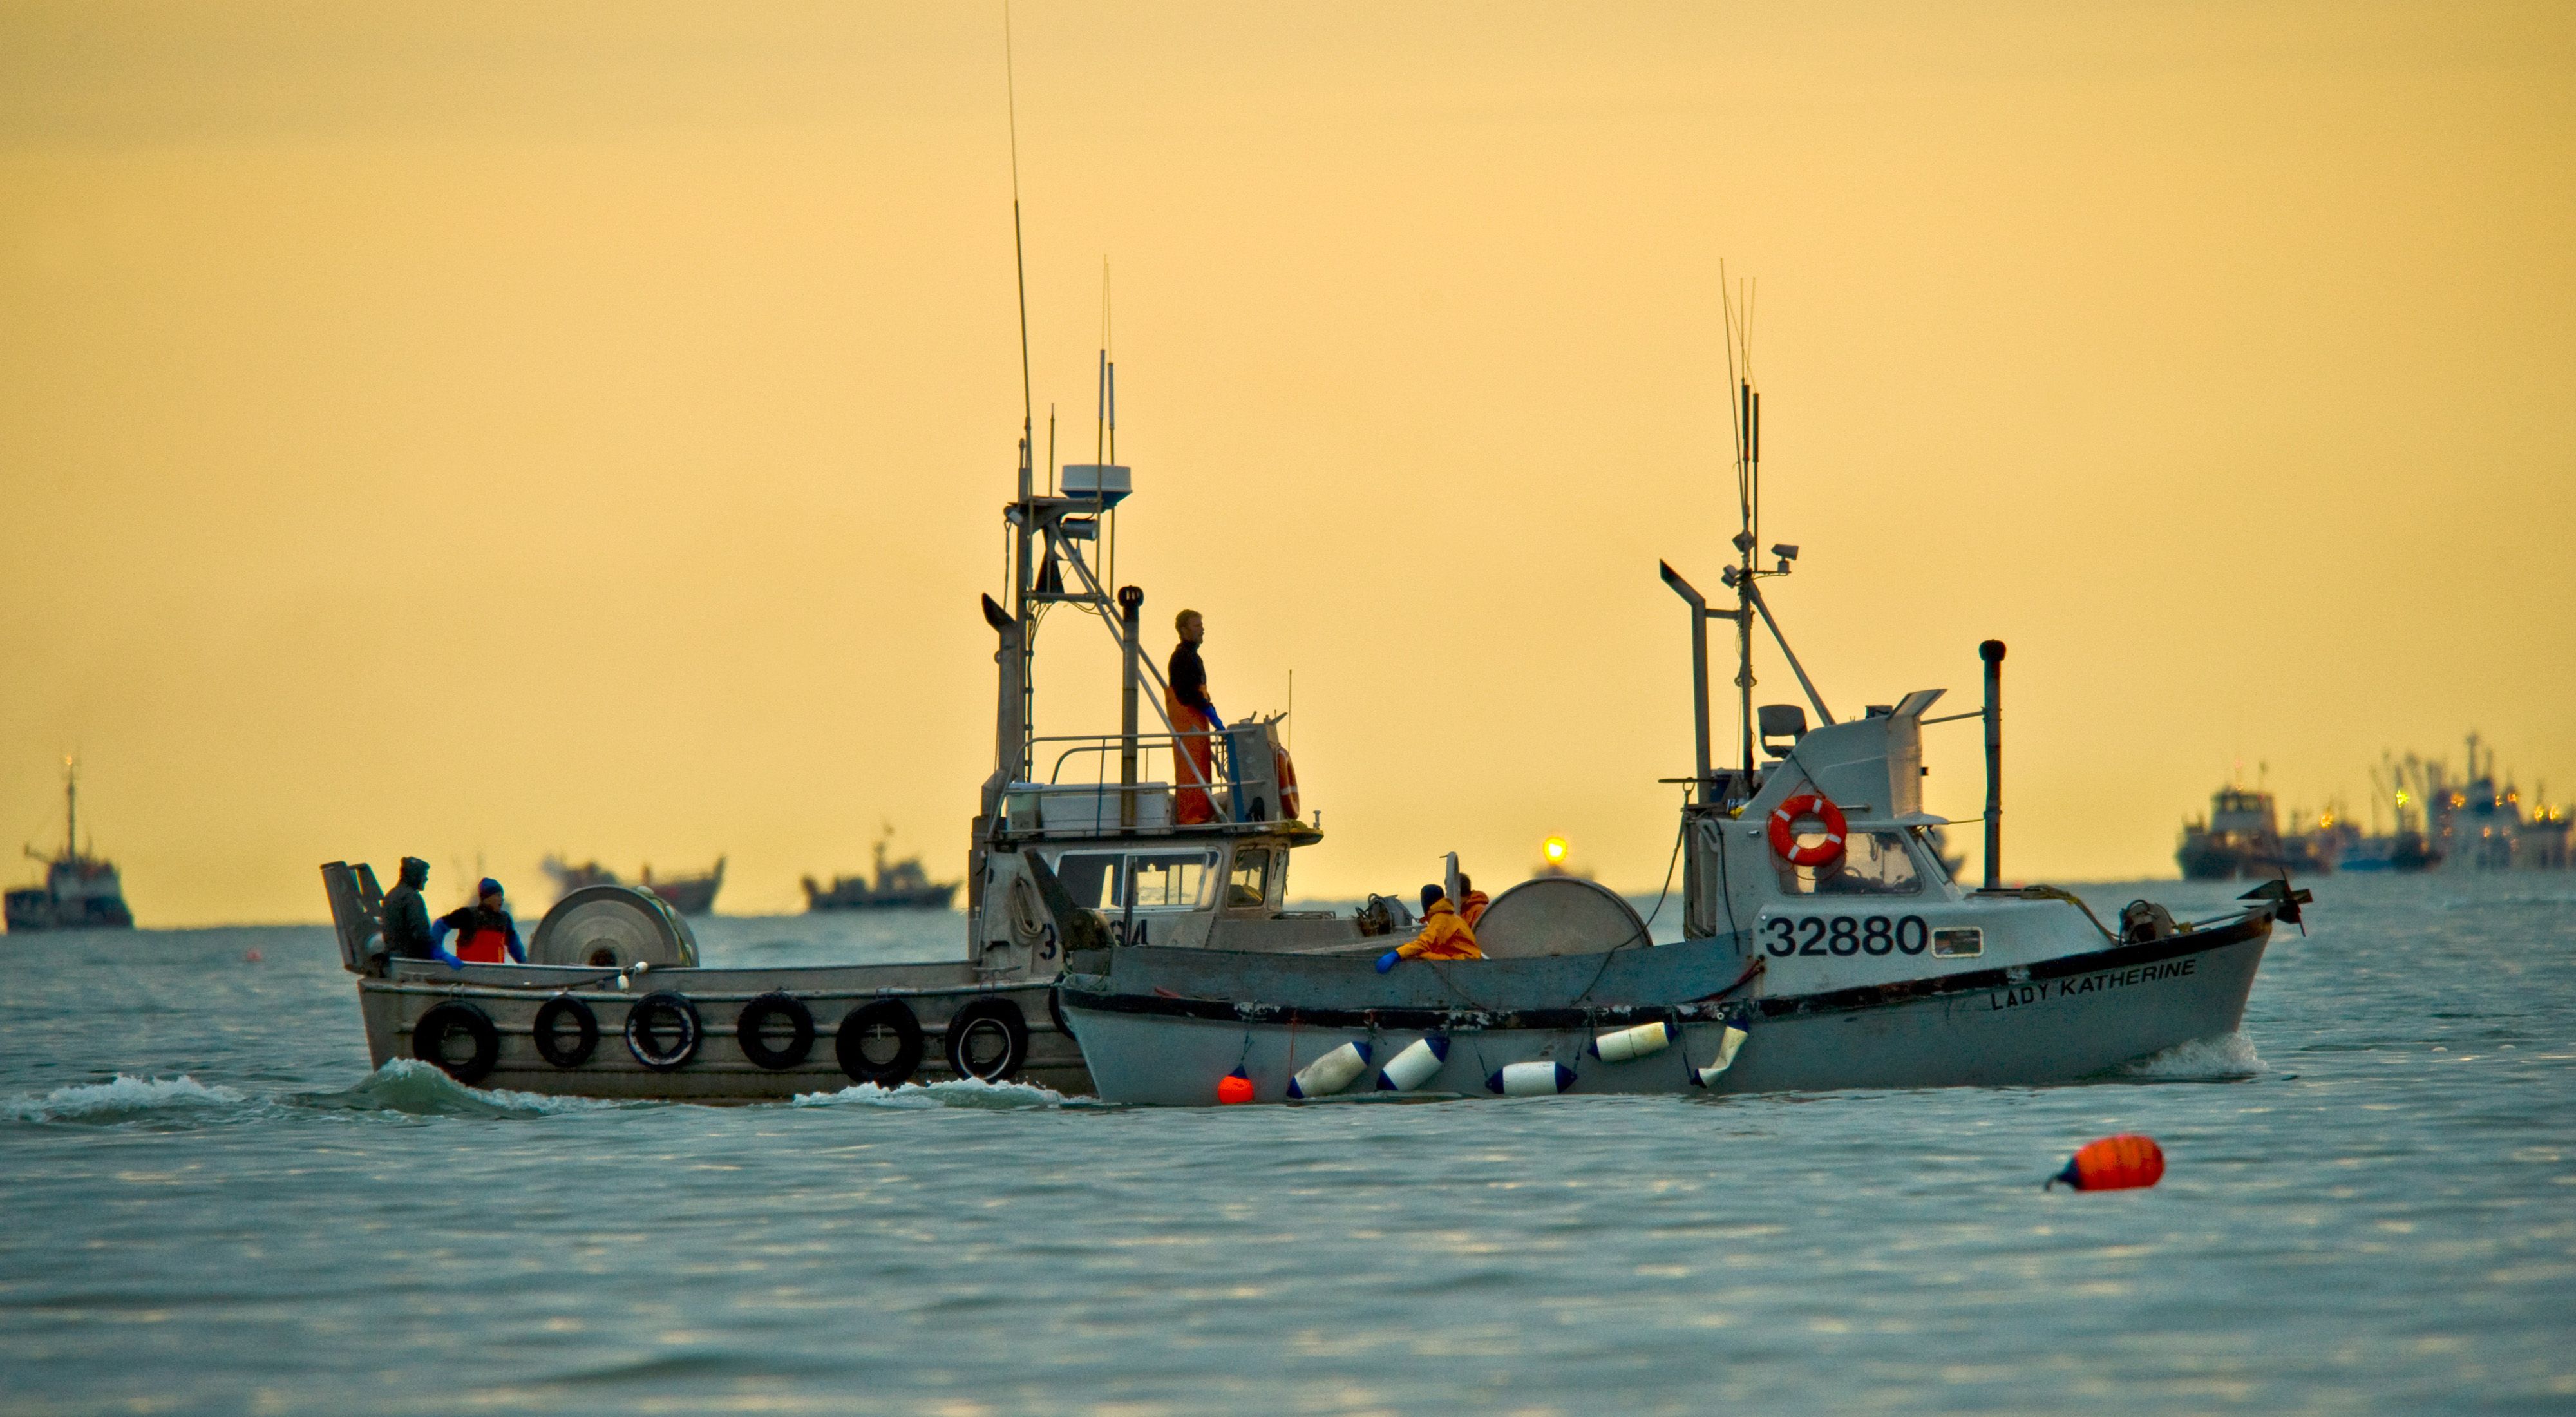 Two commercial fishing boats ply the waters of Alaska's Bristol Bay.